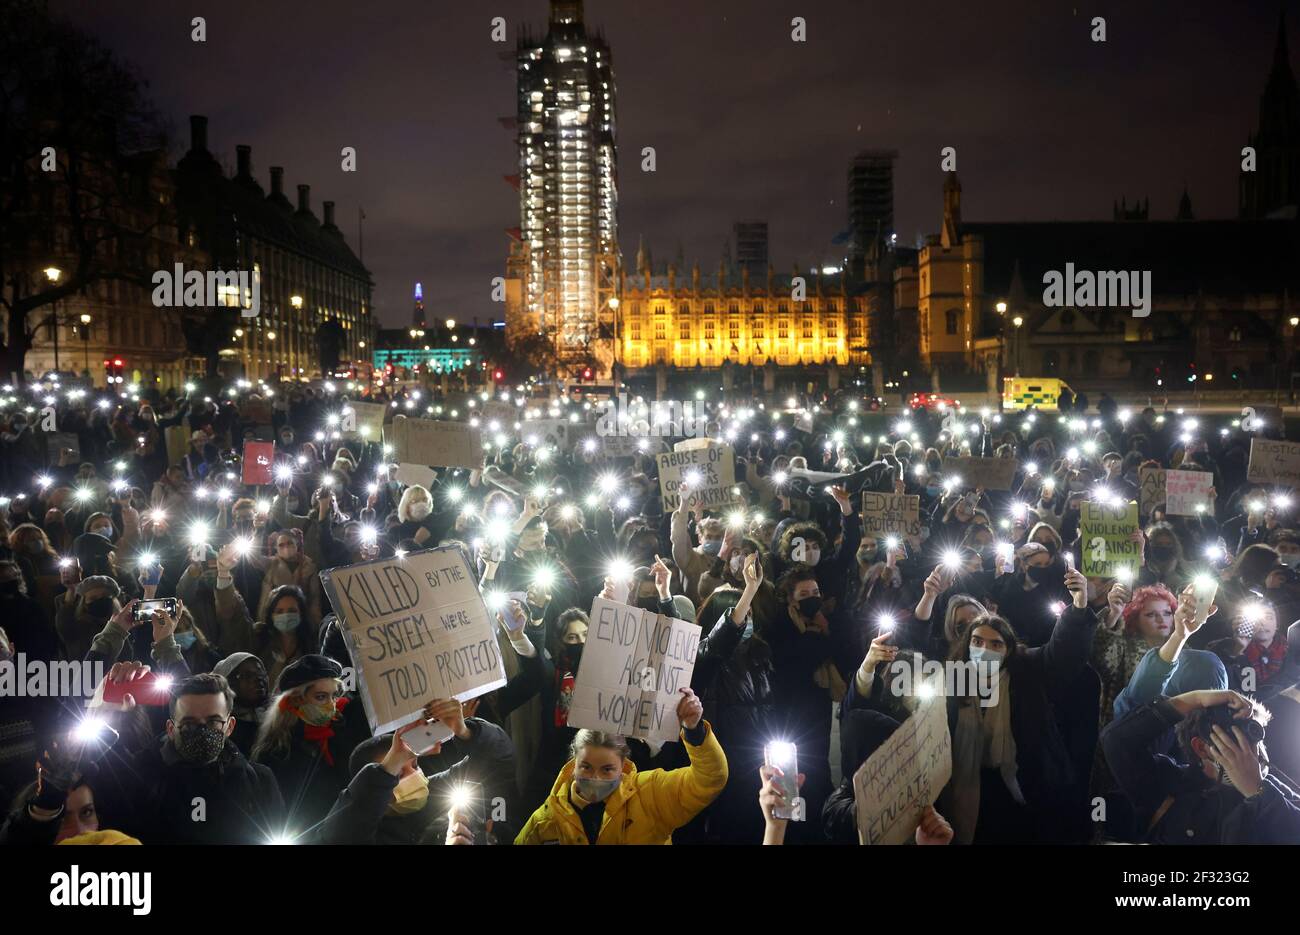 People flash lights from their mobile phones as they attend a protest at the Parliament Square, following the kidnap and murder of Sarah Everard, in London, Britain March 14, 2021. REUTERS/Henry Nicholls Stock Photo